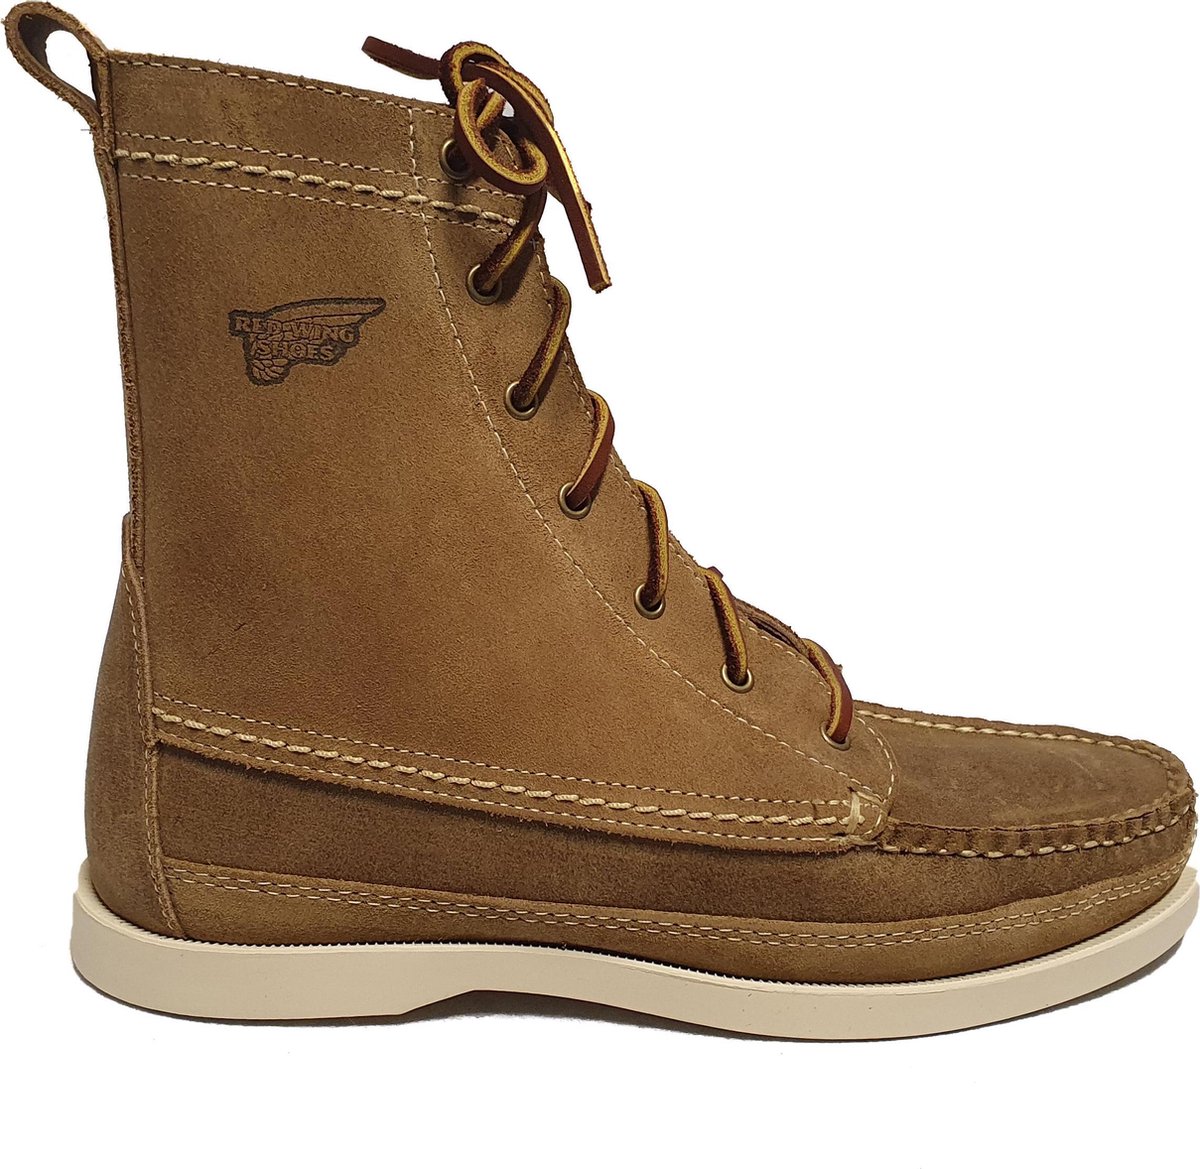 Red Wing Wabasha Boat Boot Suede 07190 Camel EU 45